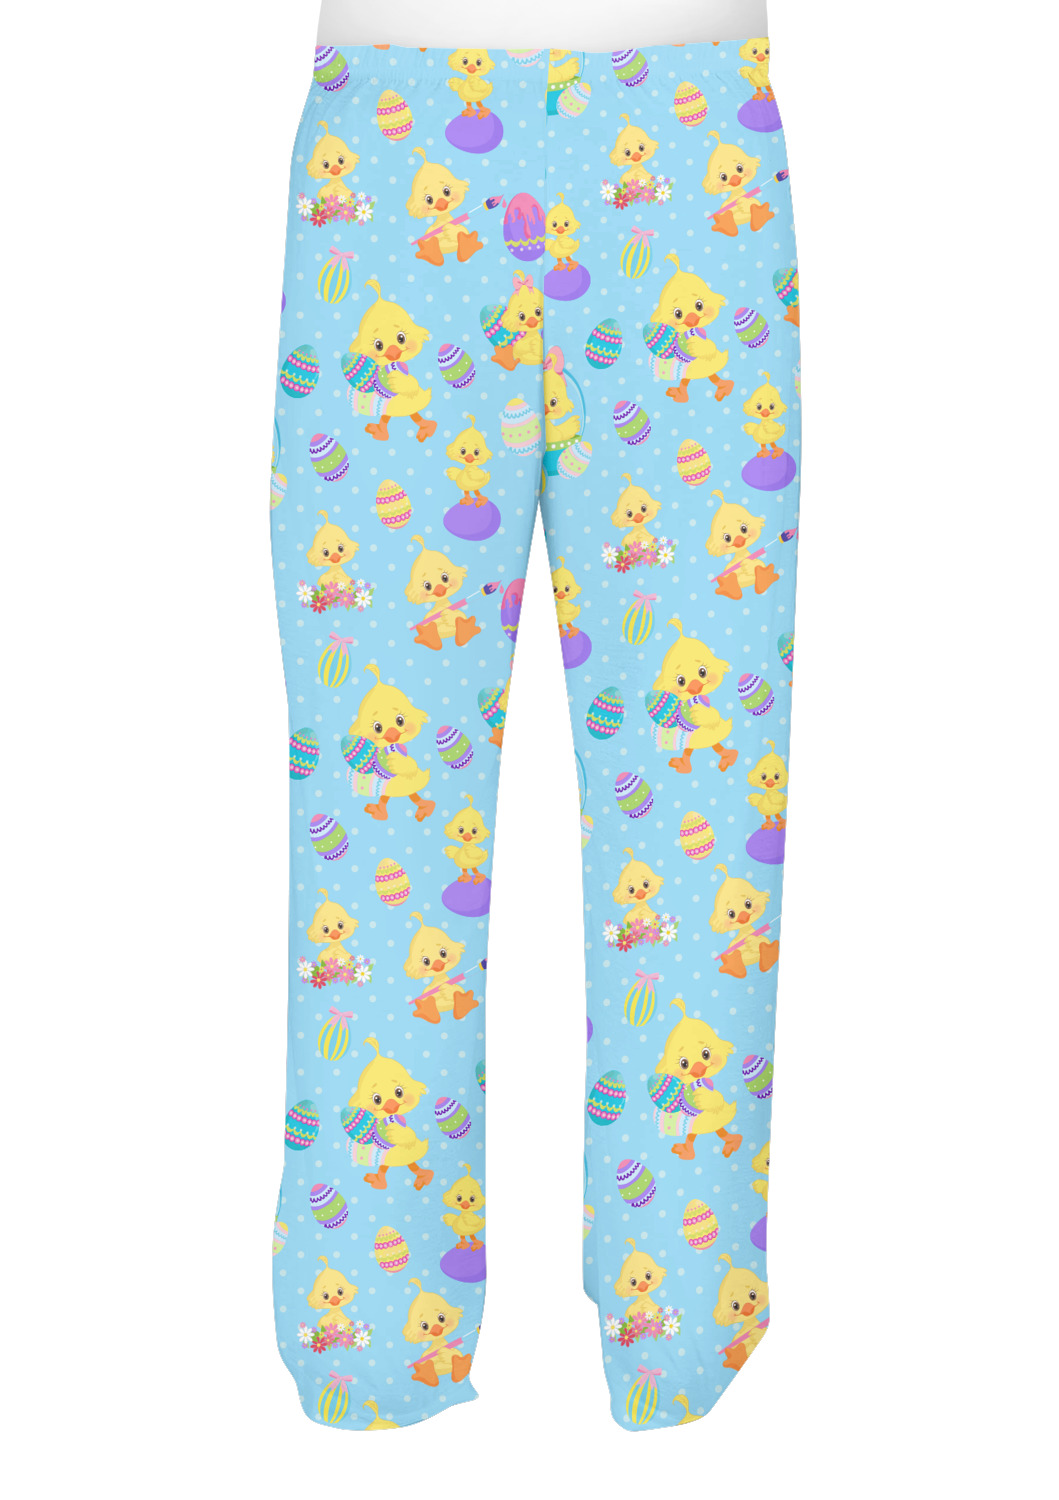 Happy Easter Mens Pajama Pants - XL (Personalized) - YouCustomizeIt